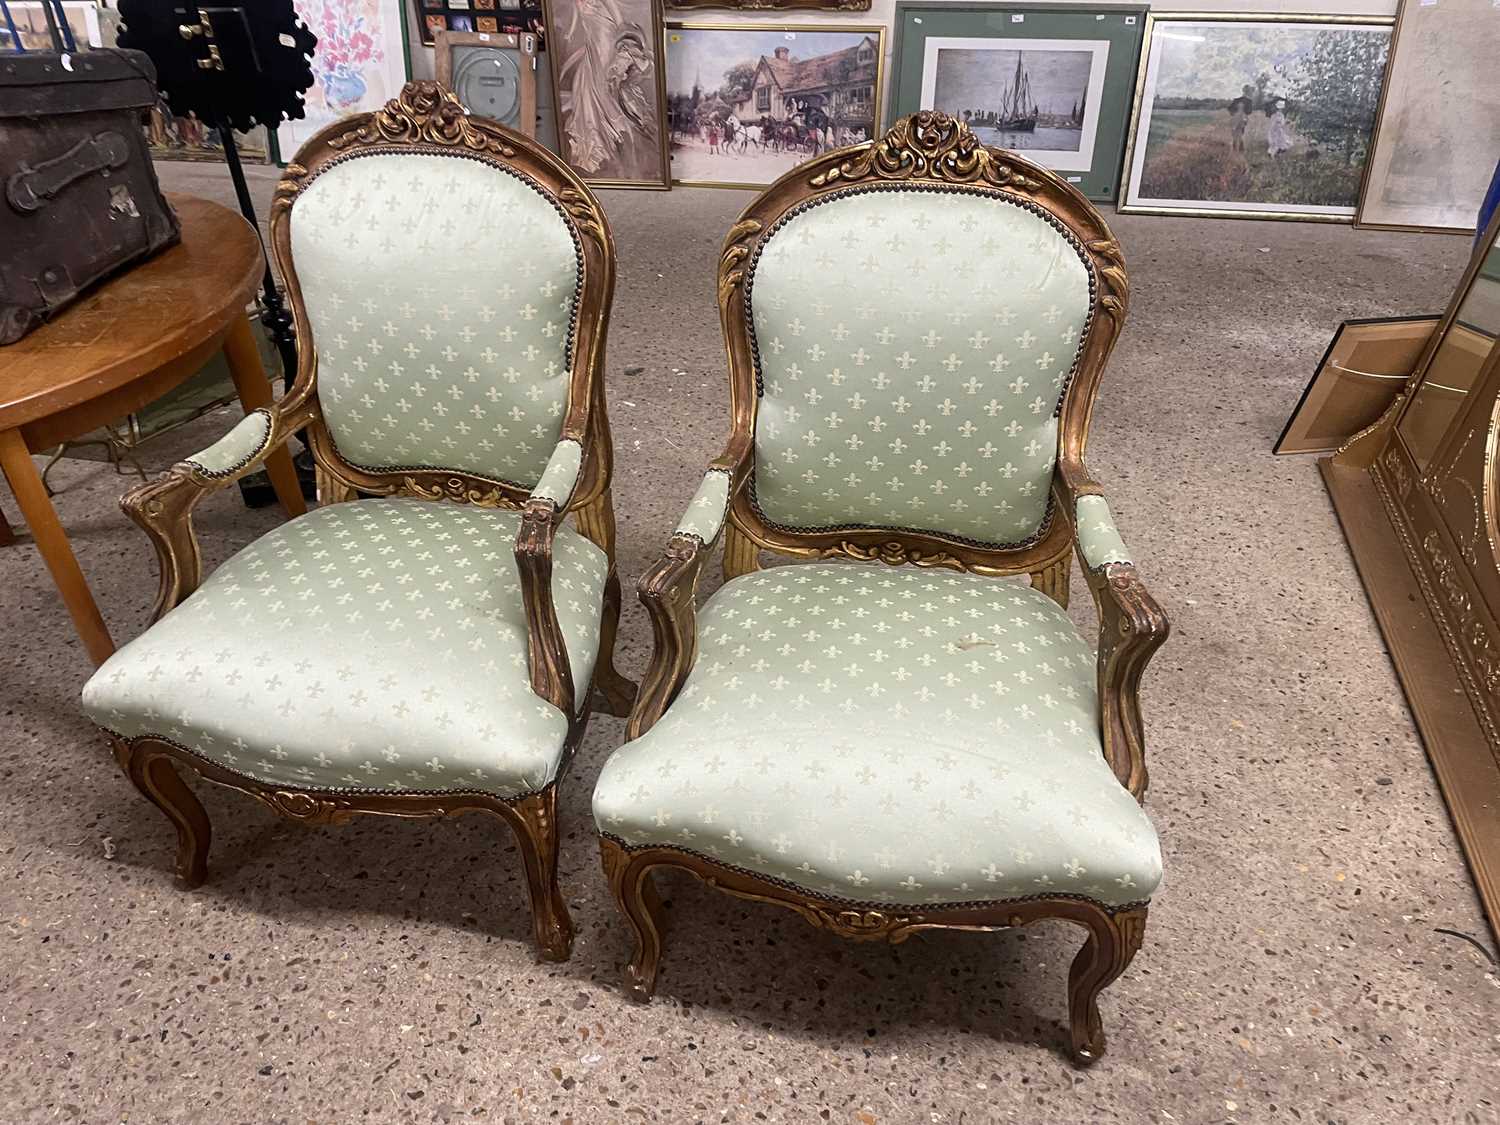 Gilt wood framed armchairs upholstered in pale green fabric